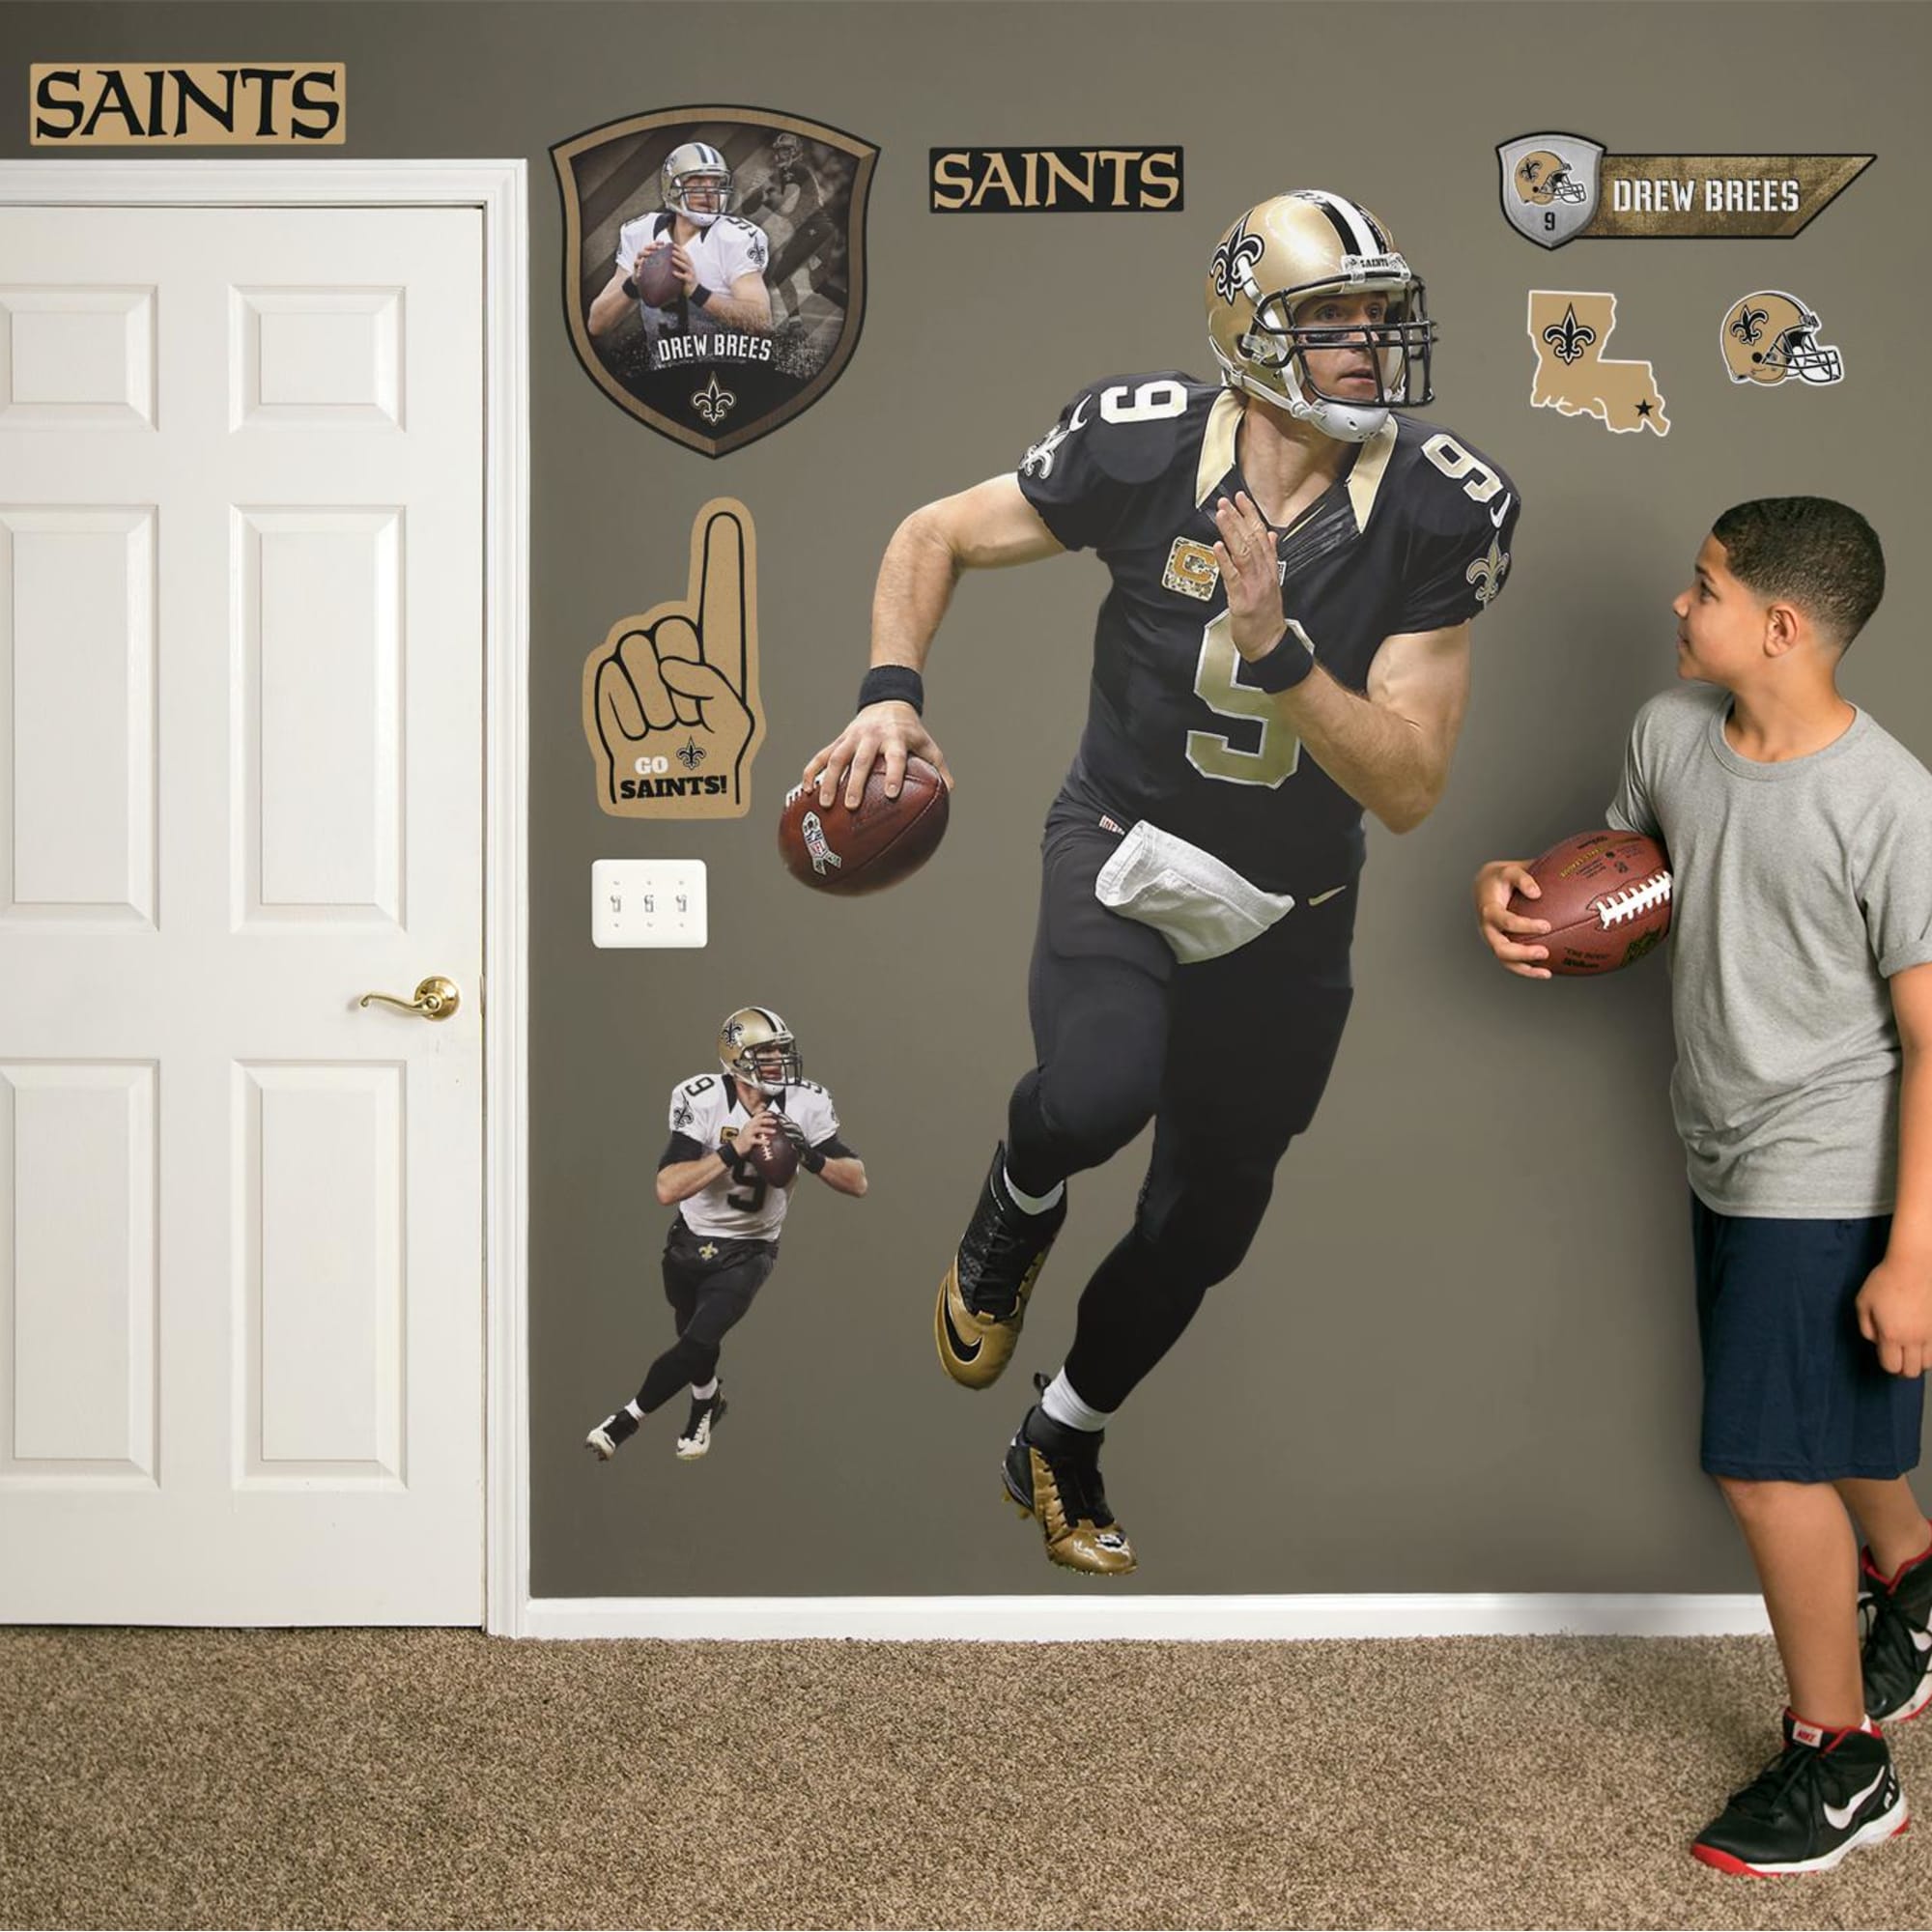 Drew Brees for New Orleans Saints: Home - Officially Licensed NFL Removable Wall Decal Life-Size Athlete +11 Decals (42"W x 78"H